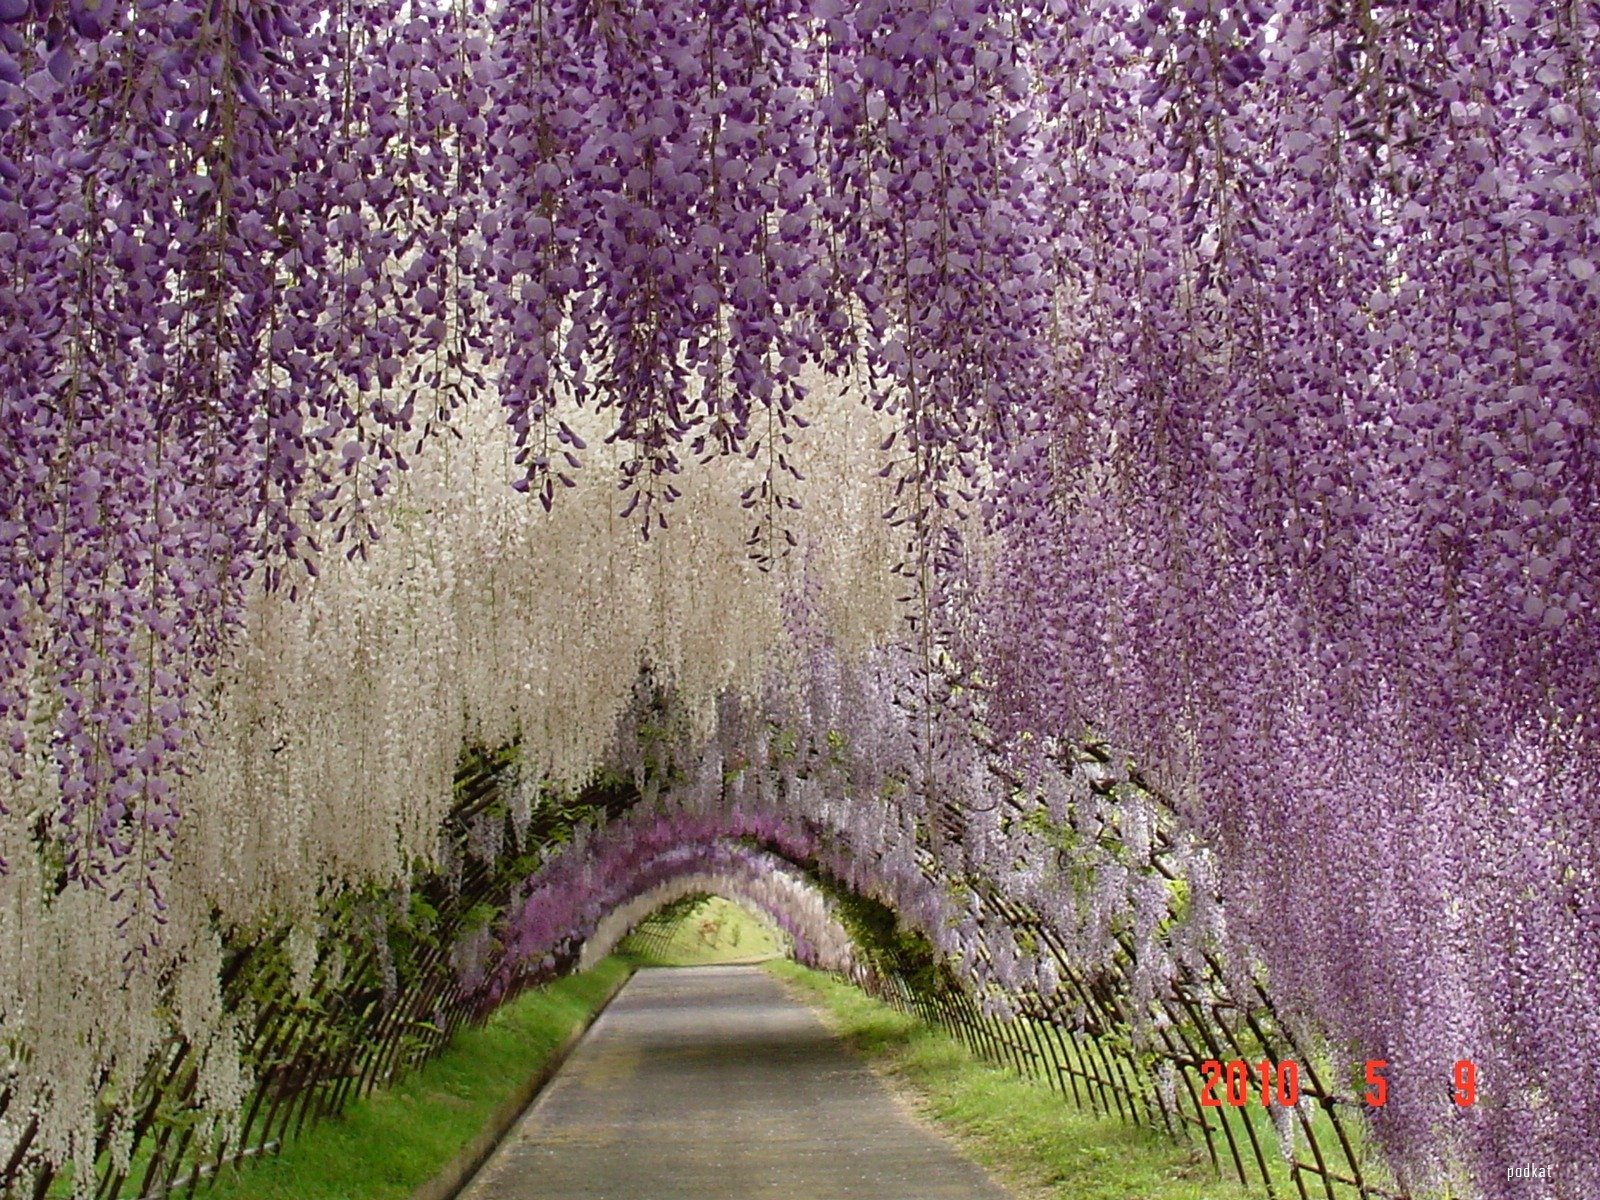 These photos were taken at the Kawachi Fuji Garden, about a four hour drive from Tokyo, but there are wisteria festivals all over Japan, including at the ...